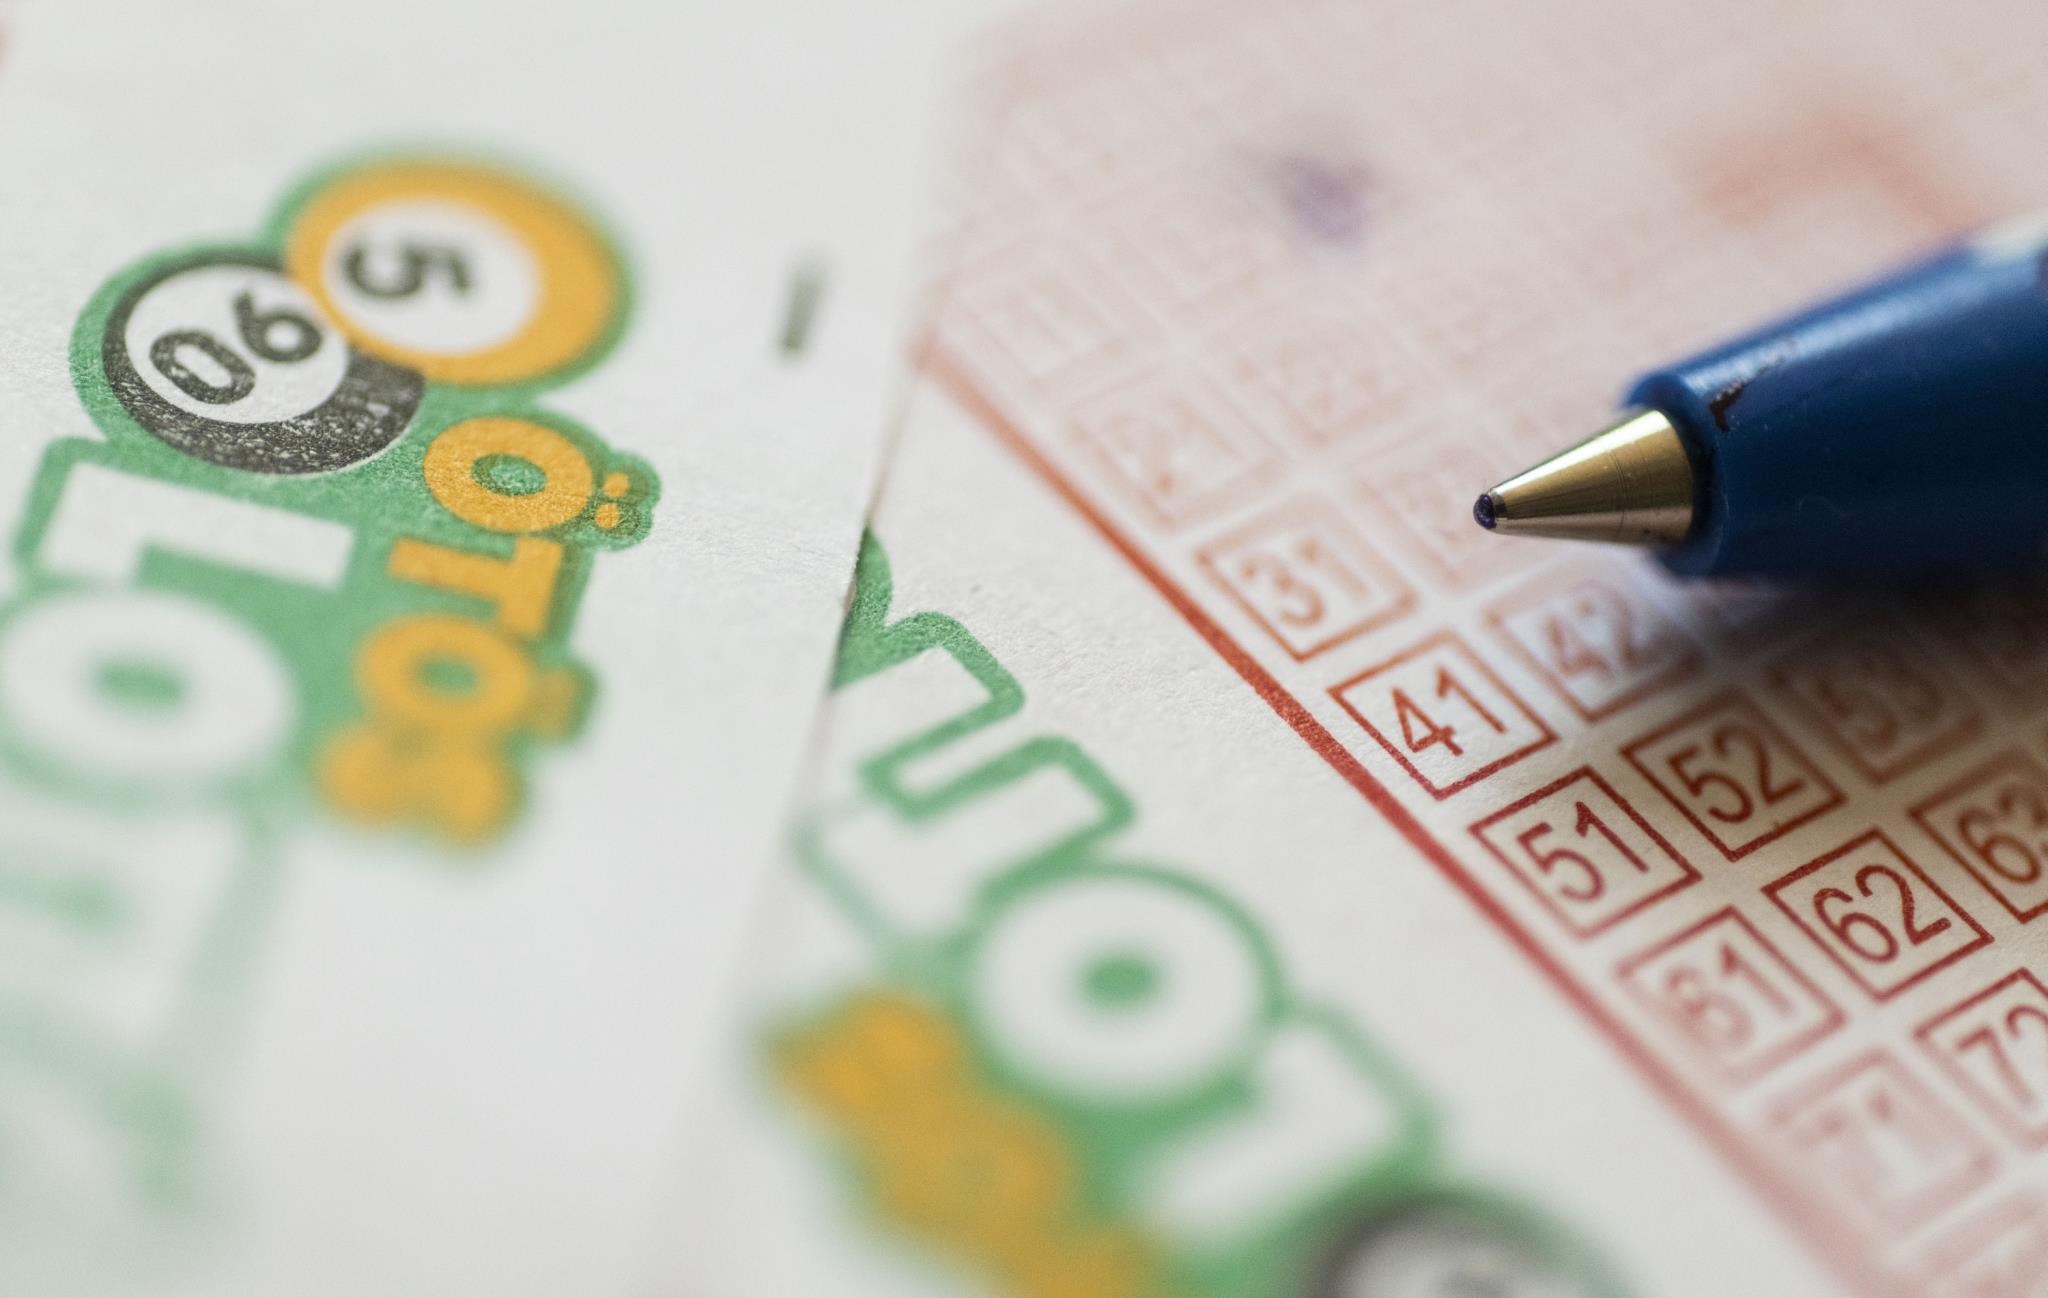 Economics: Lottery numbers for fives were drawn, but only fours brought in millions